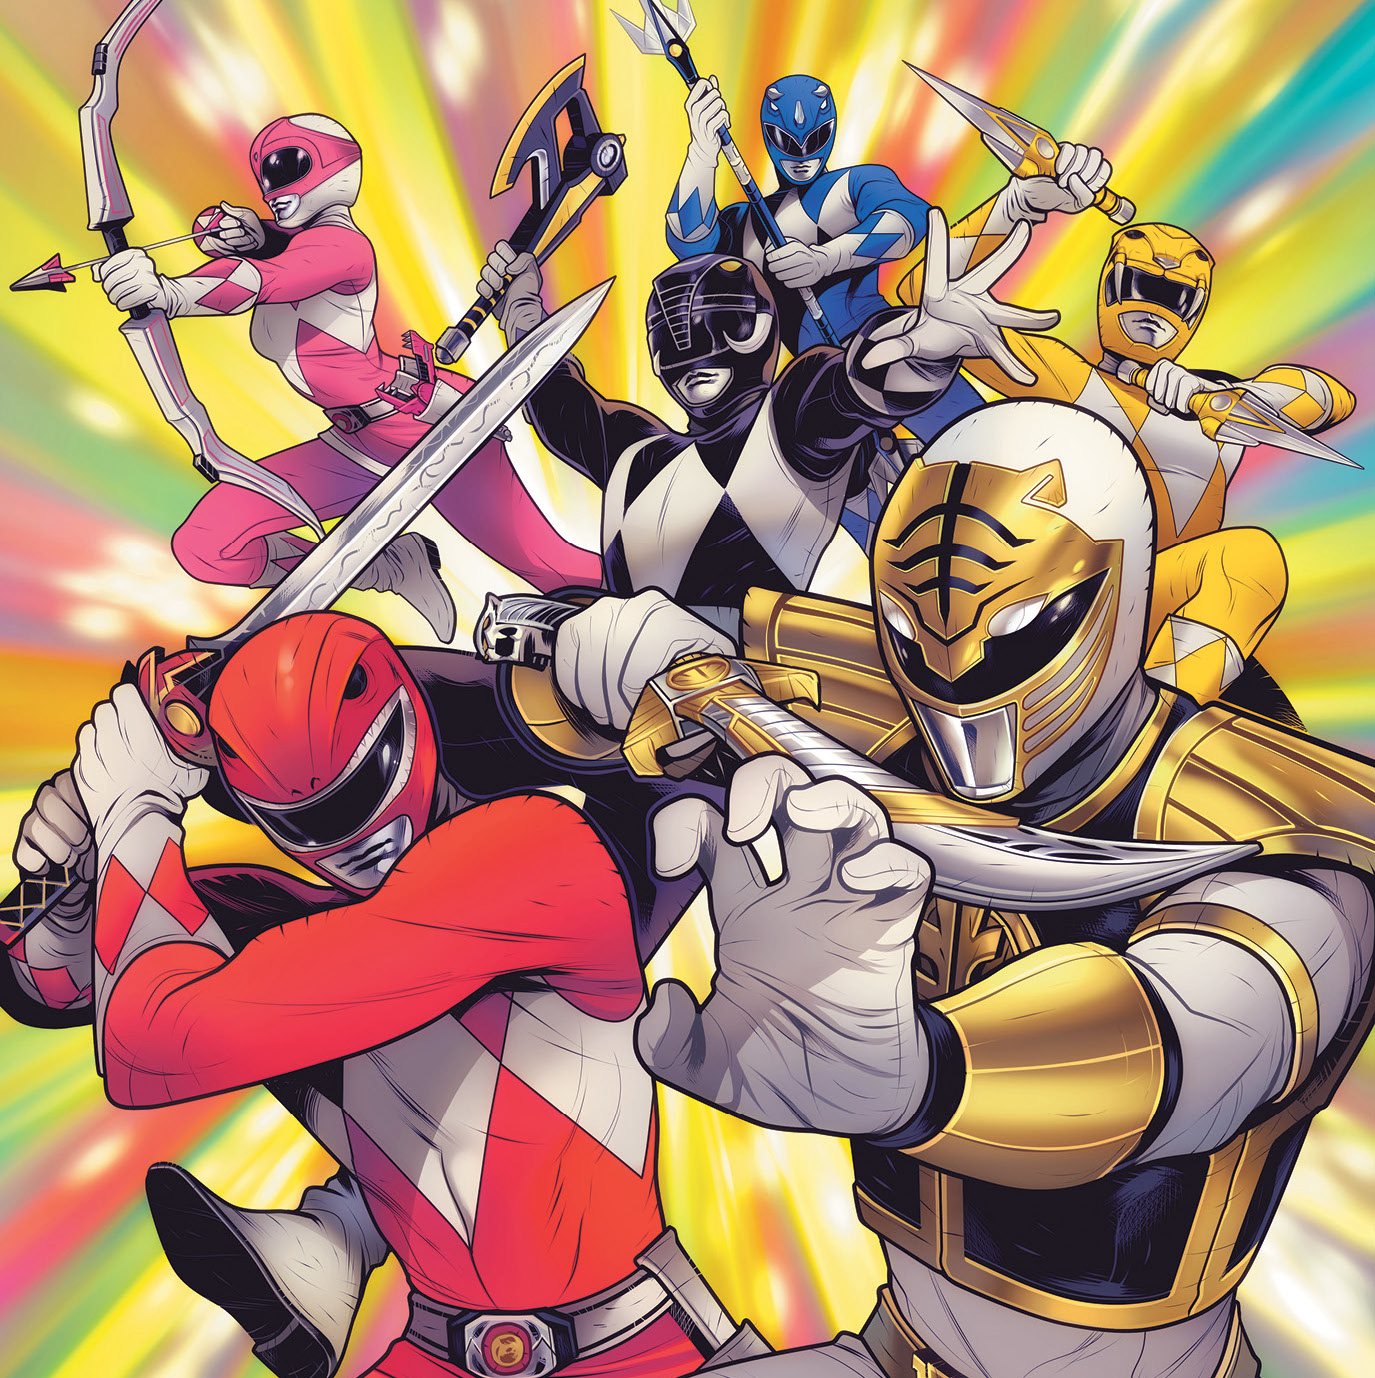 EXCLUSIVE BOOM! Preview: Mighty Morphin #11